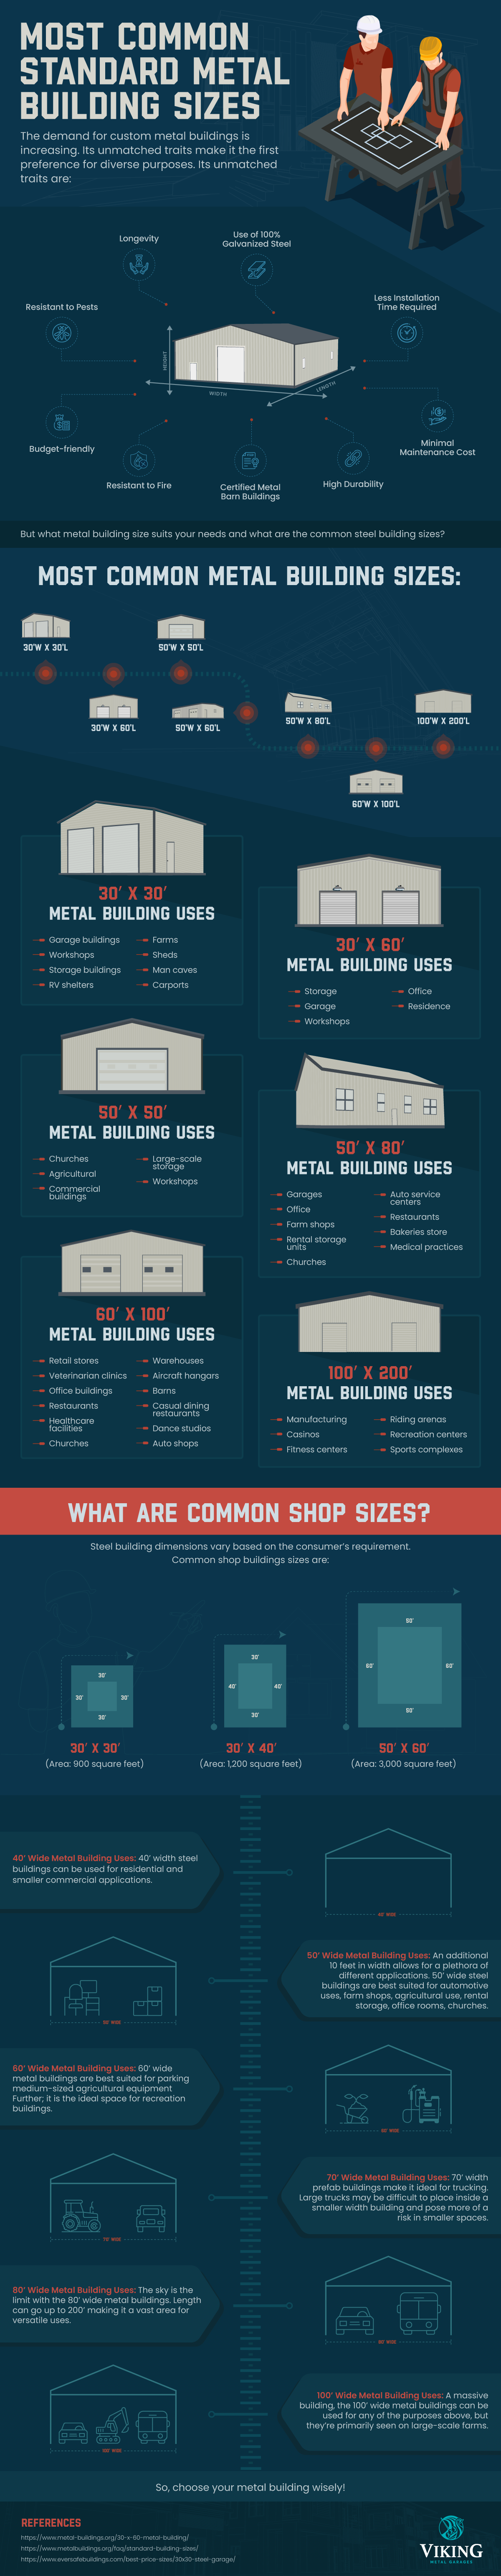 Most Common Standard Metal Building Sizes